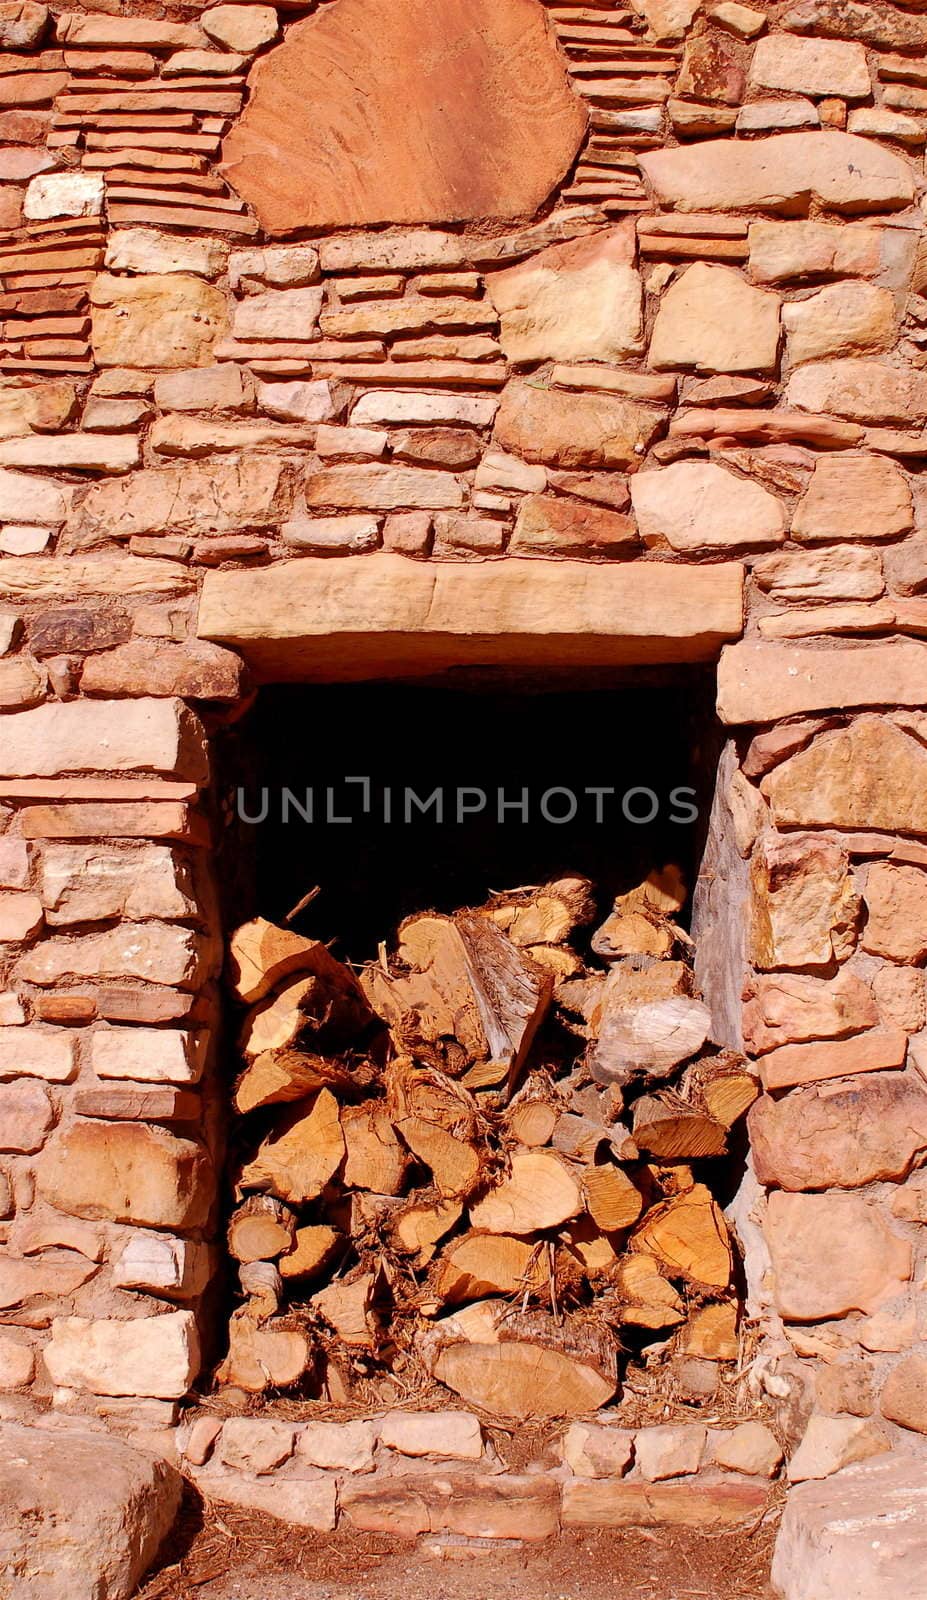 Desert Tower at the Grand Canyon - rustic stone built structure with fire logs stacked in the centre